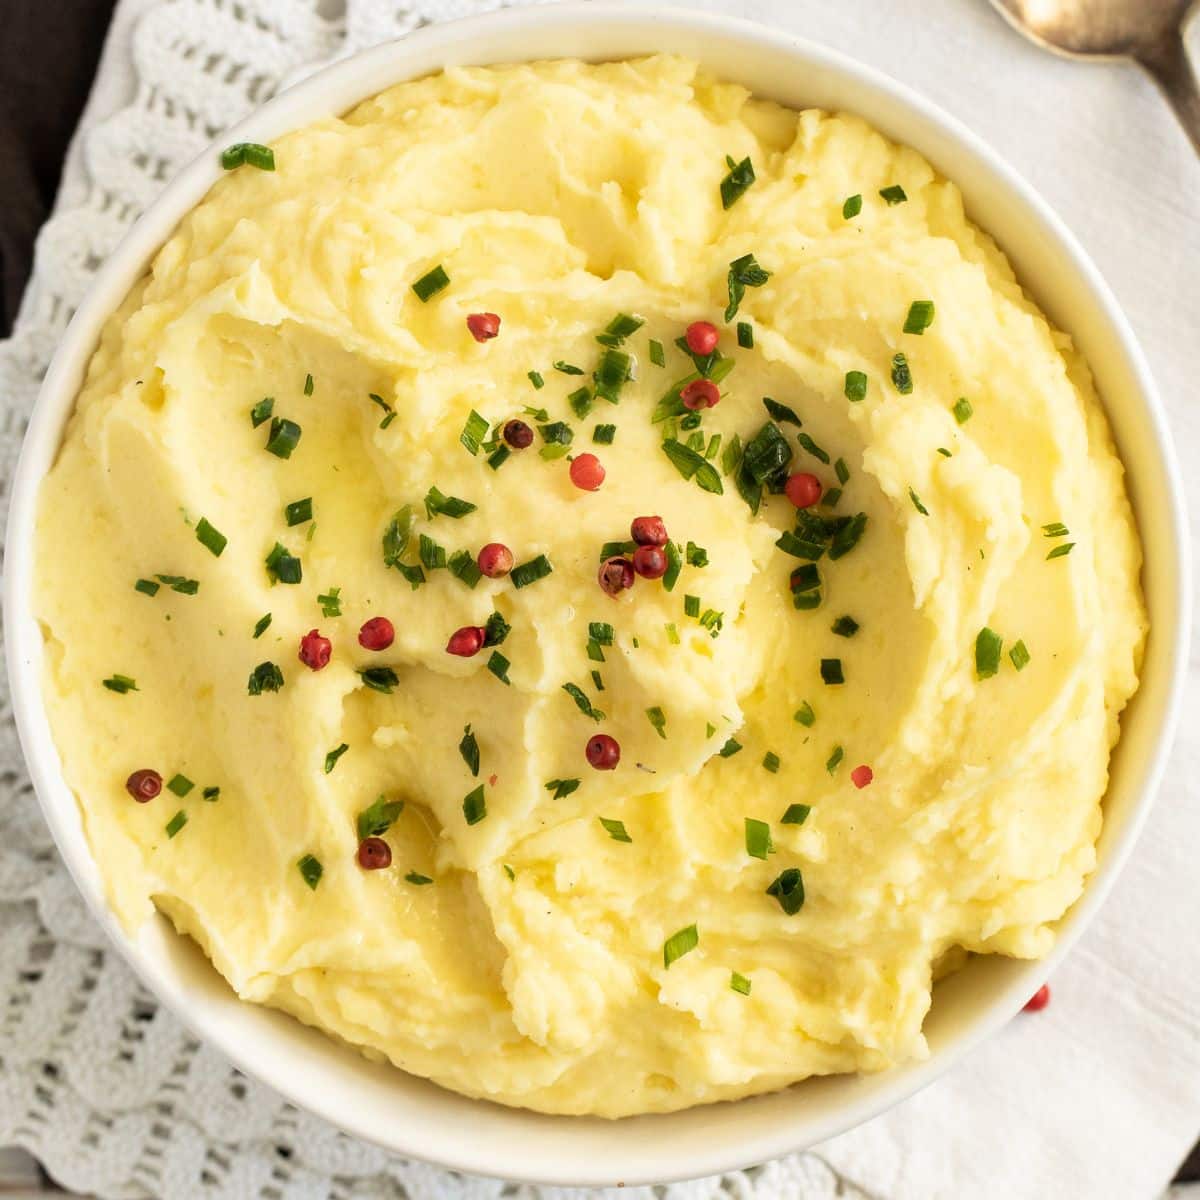 overhead view of a bowl of truffle mashed potatoes sprinkled with parsley and red pepperberries.